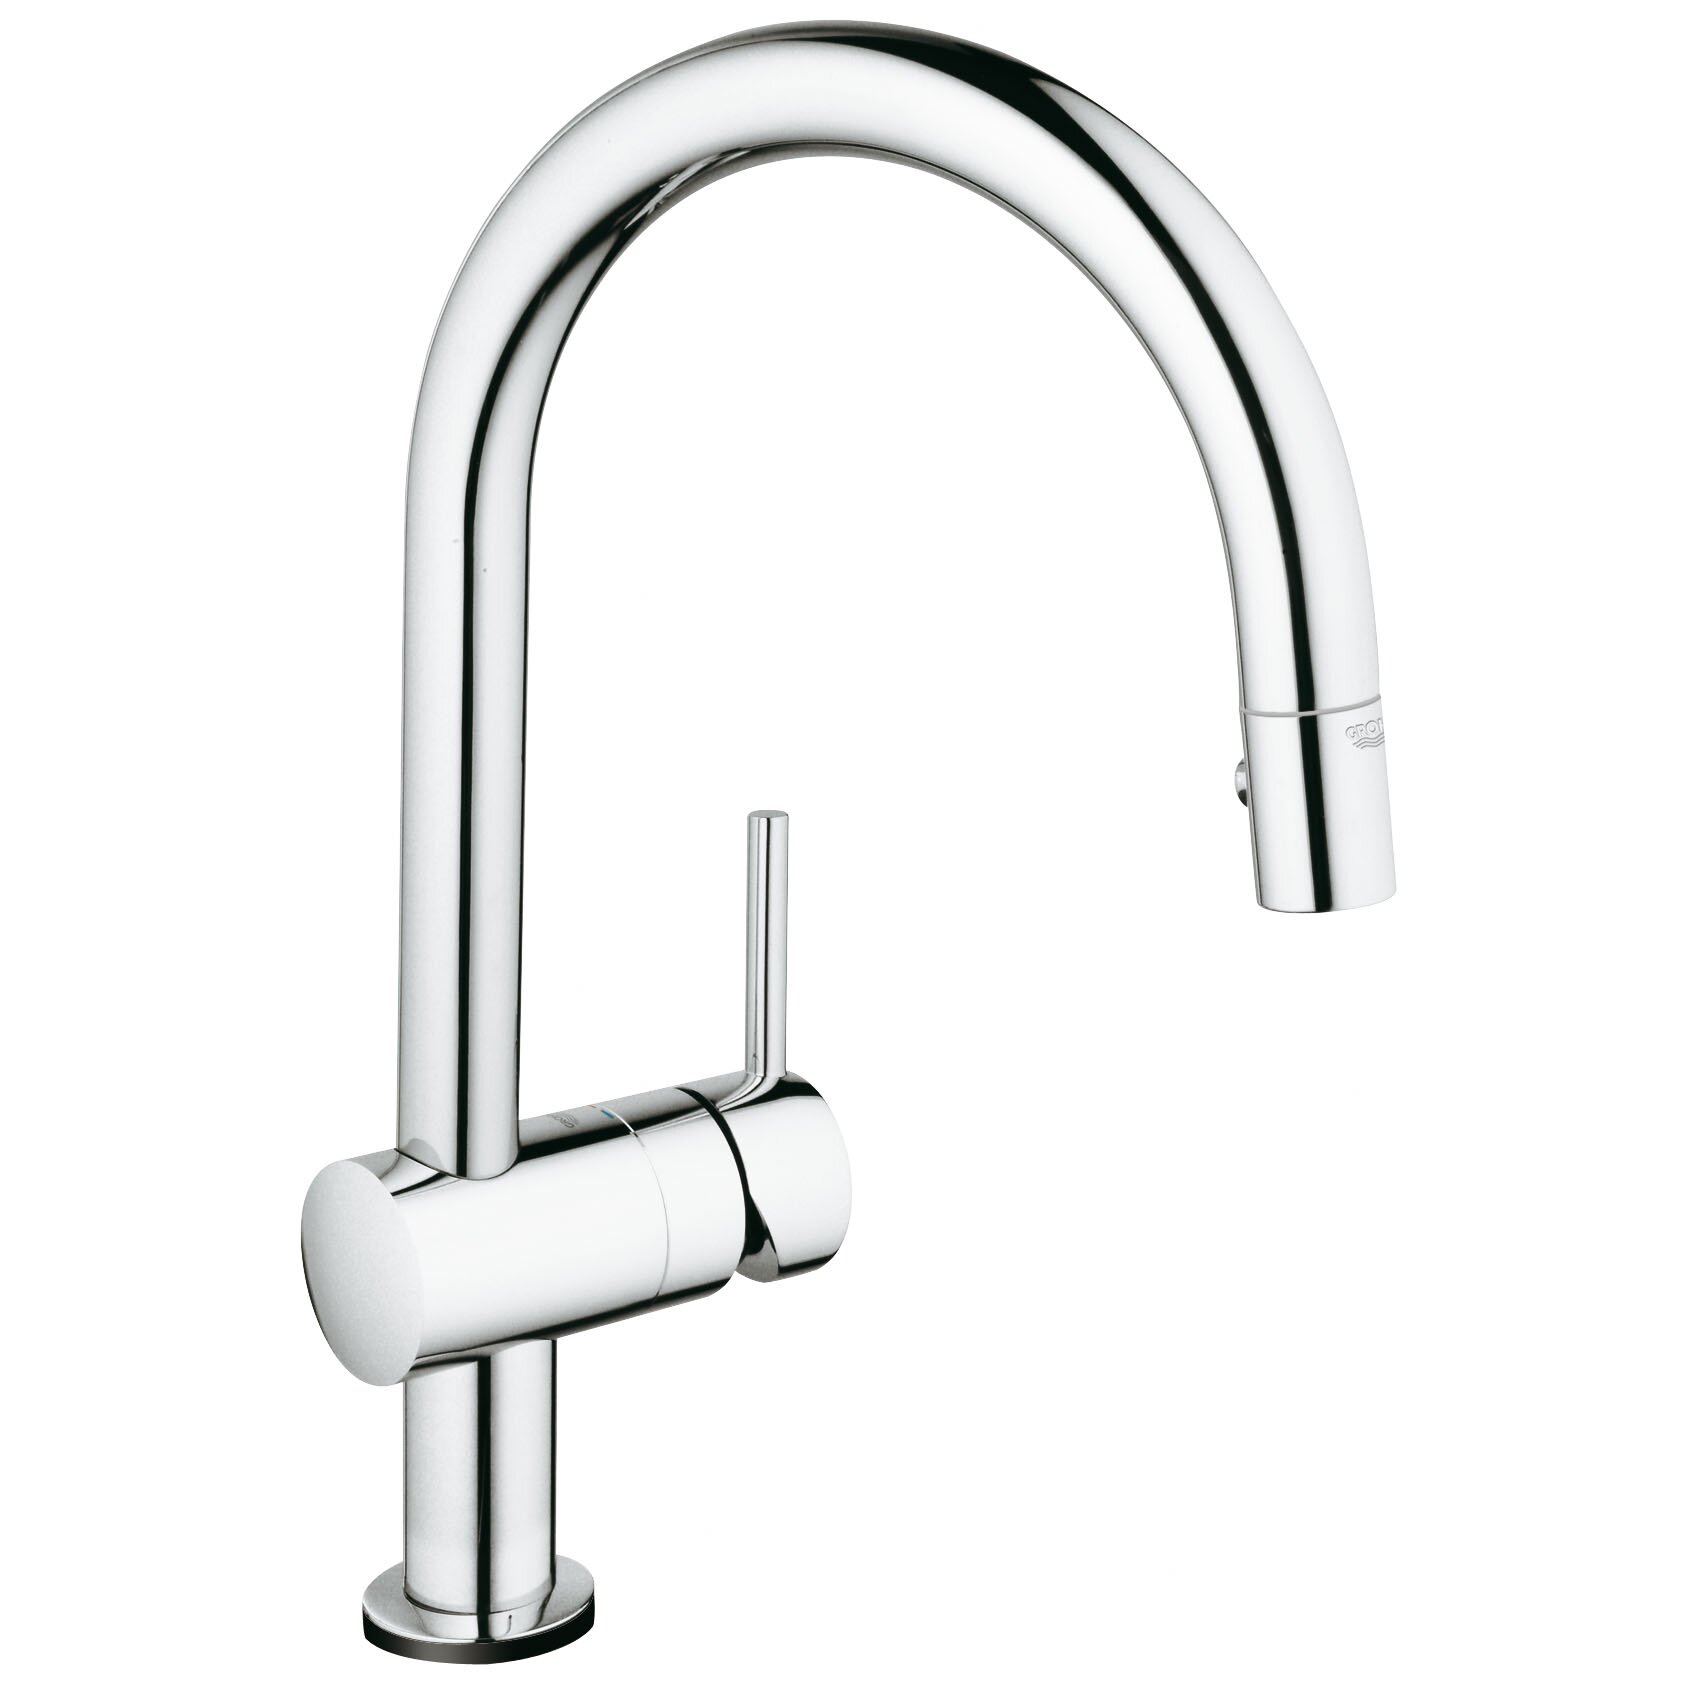 Grohe Minta Touchless Single Handle Single Hole Standard Kitchen Faucet